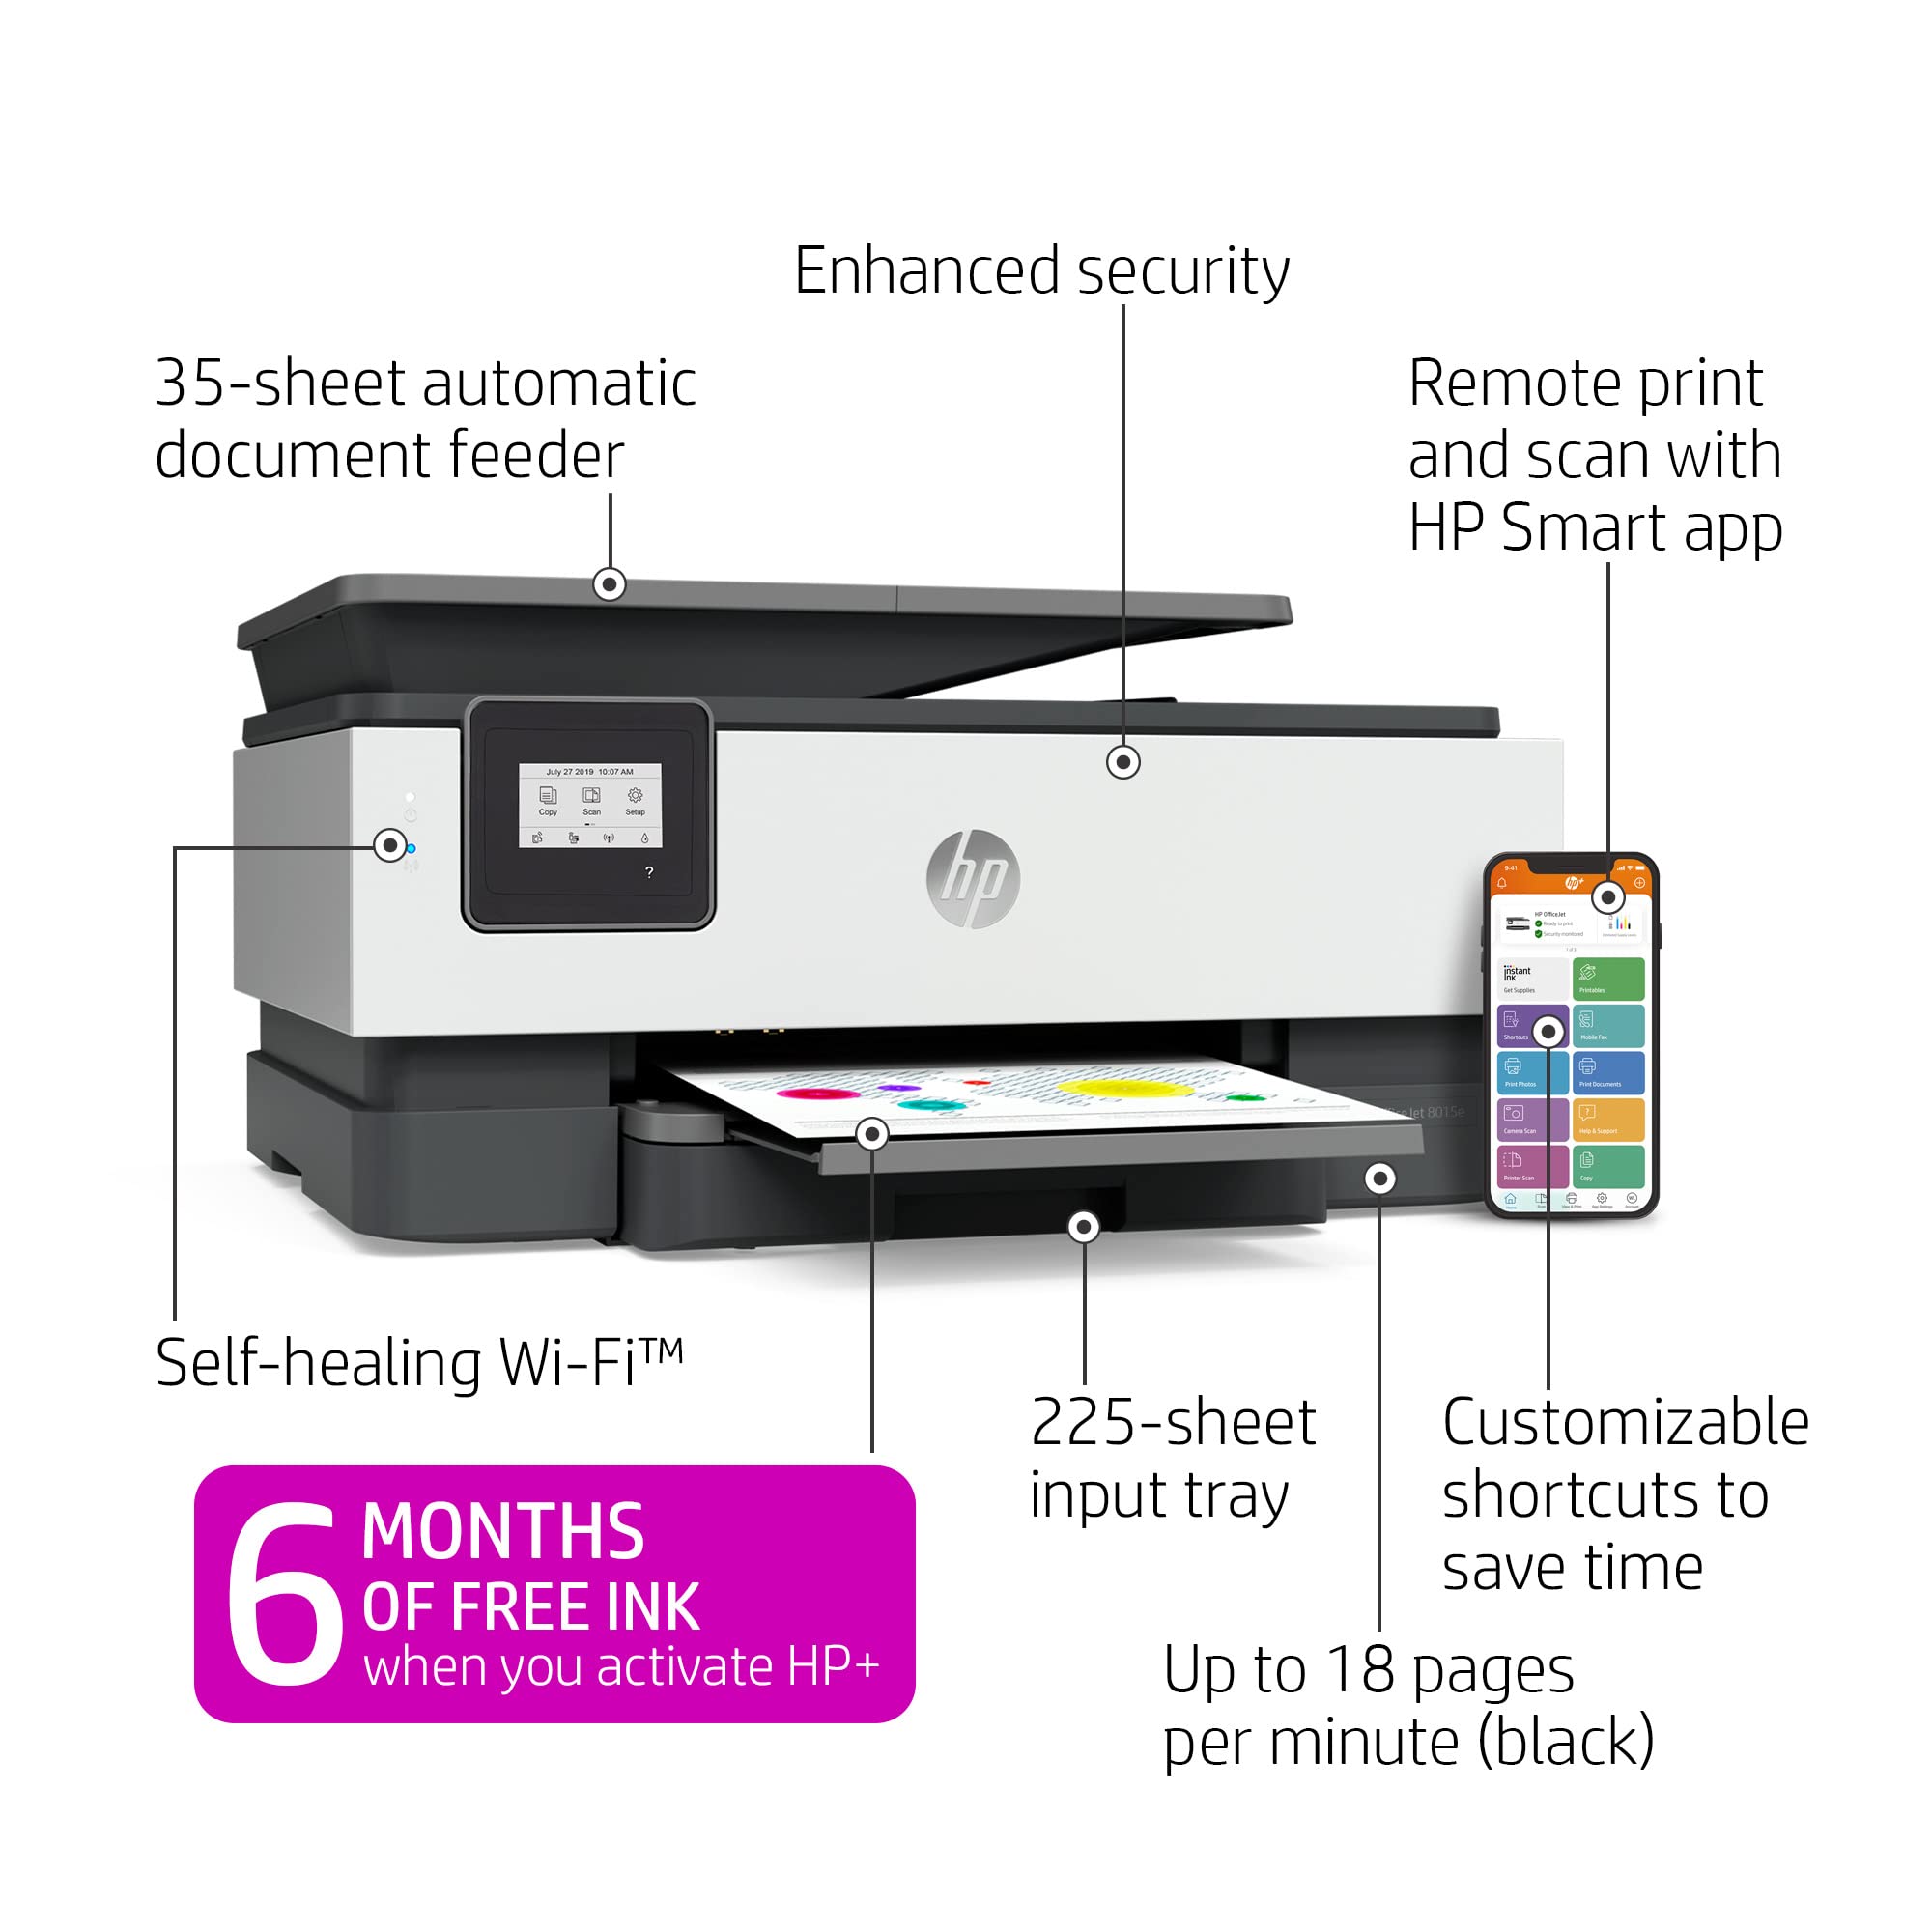 HP OfficeJet 8015e Wireless Color All-in-One Printer with 6 Months Free Ink with HP+(228F5A), White